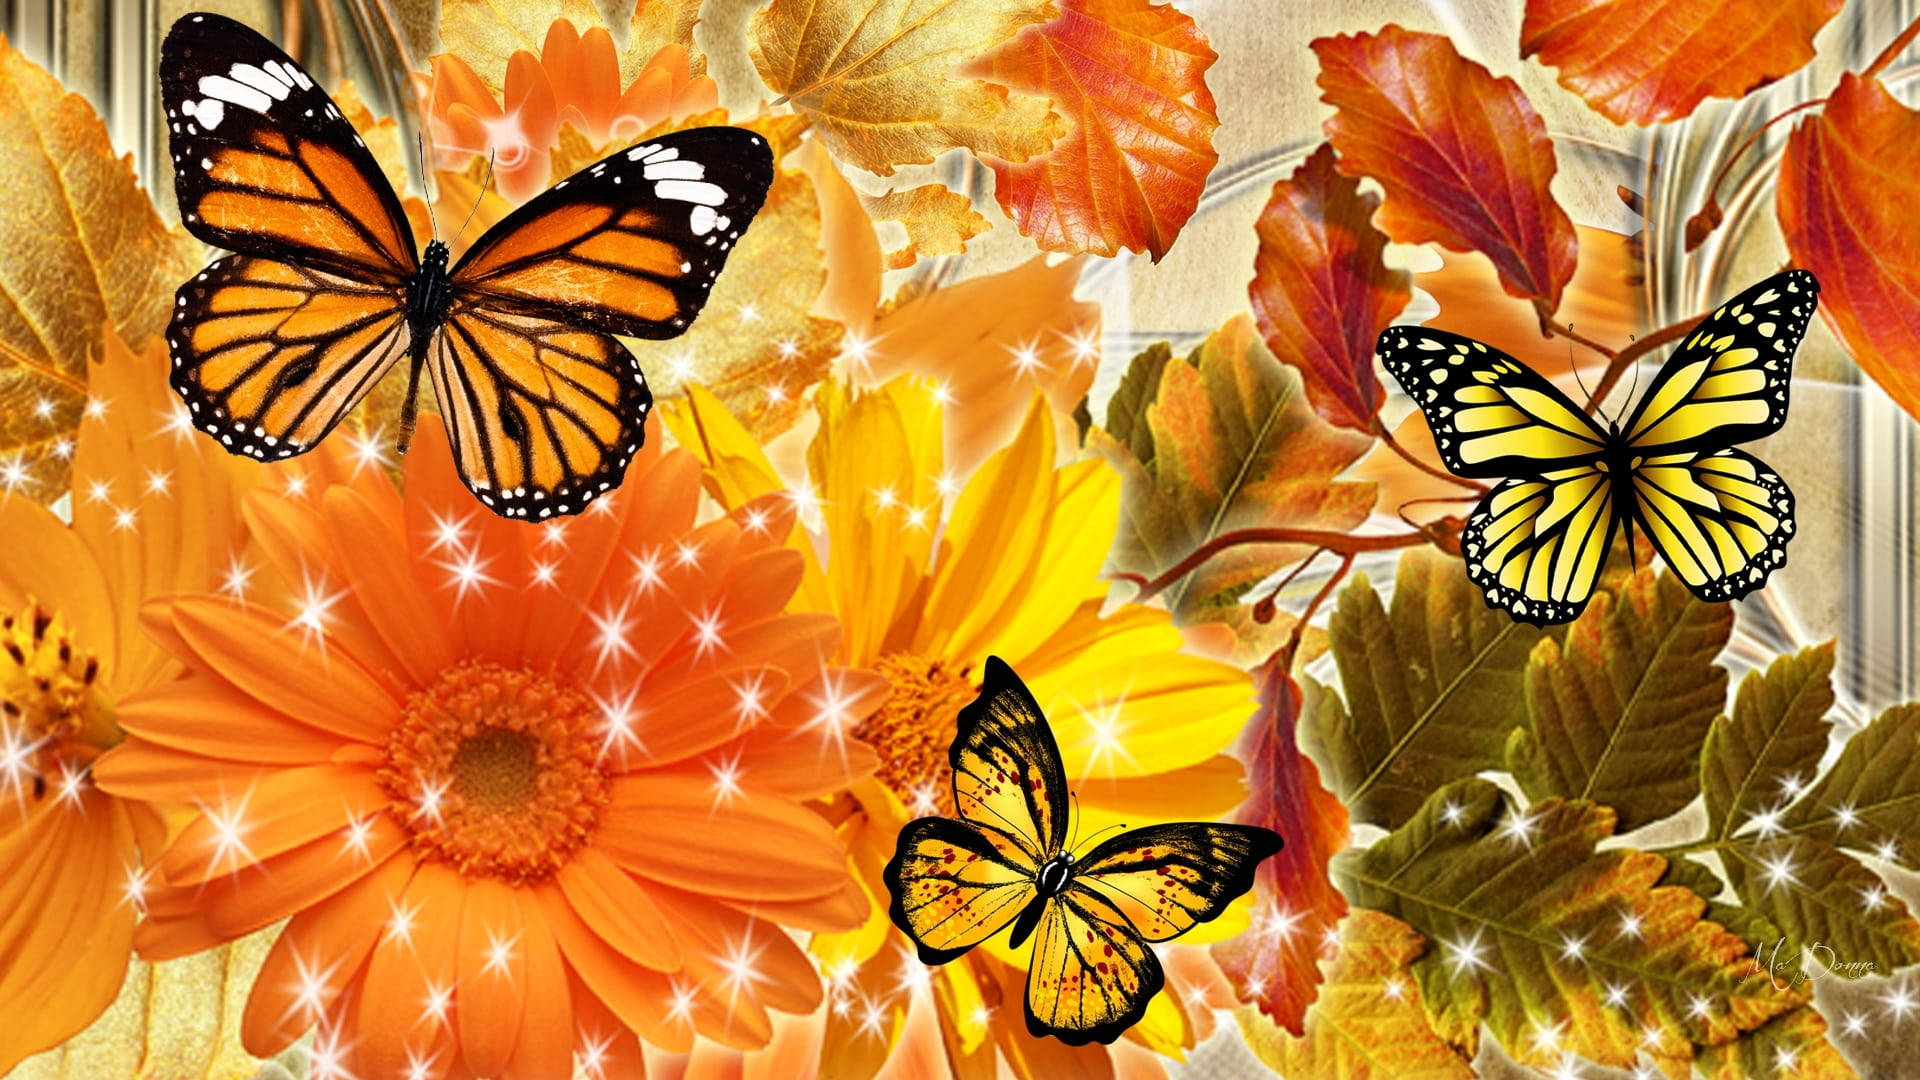 Sparkling Aesthetic Orange Butterfly With Flowers Wallpaper